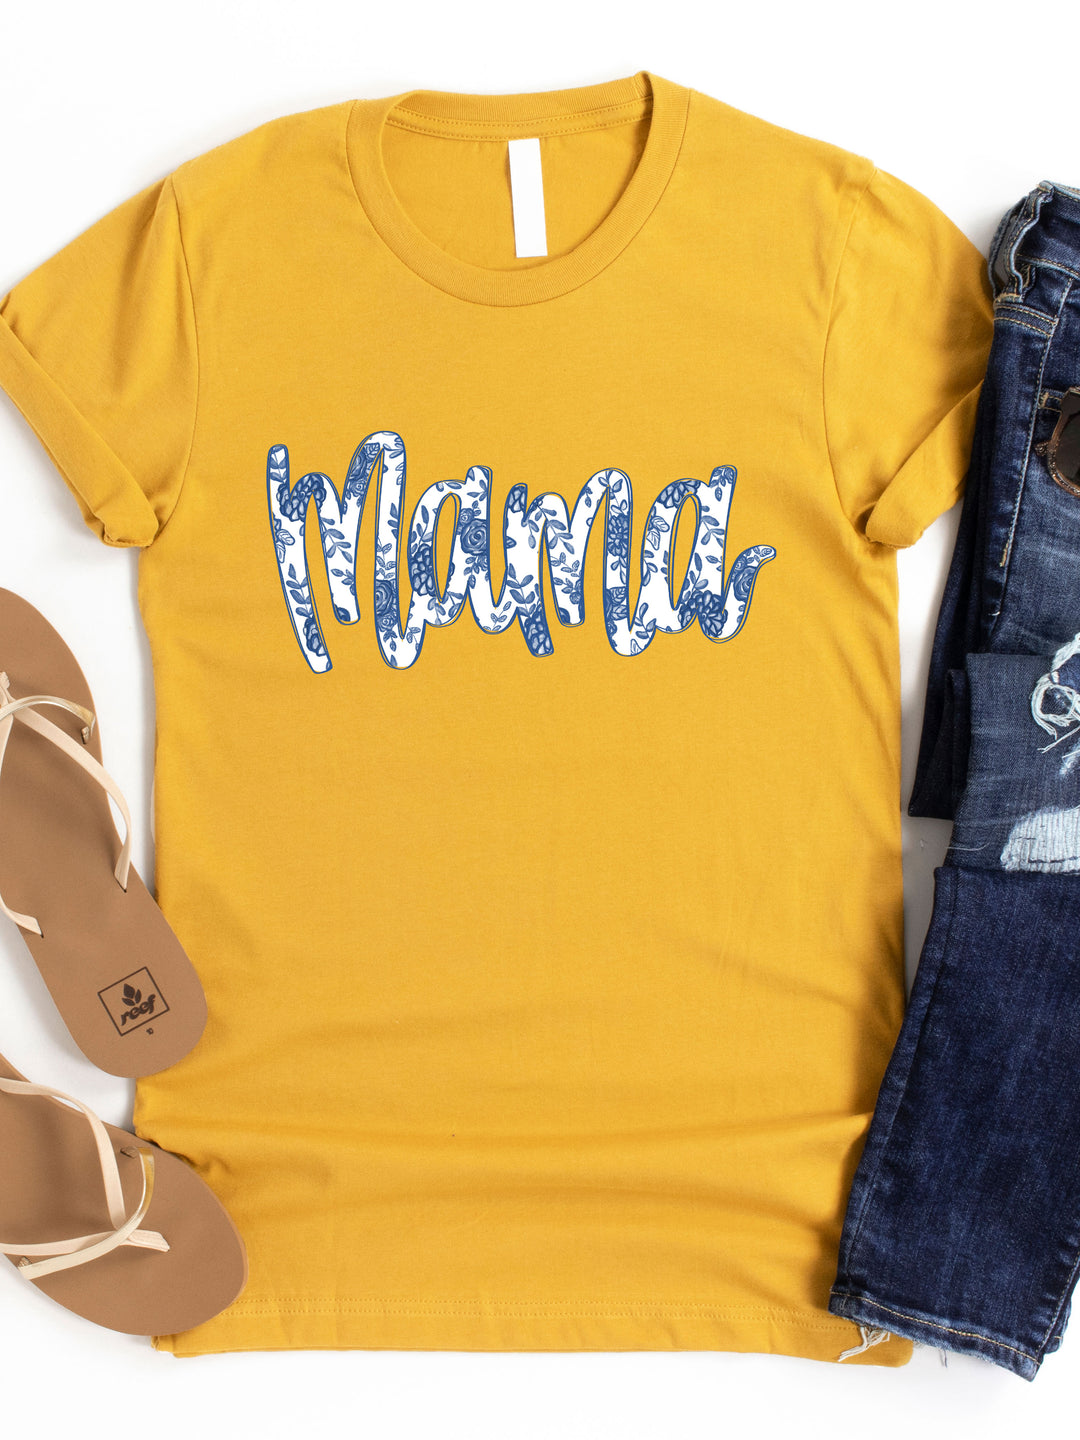 Mama Blue Floral - Graphic Tee